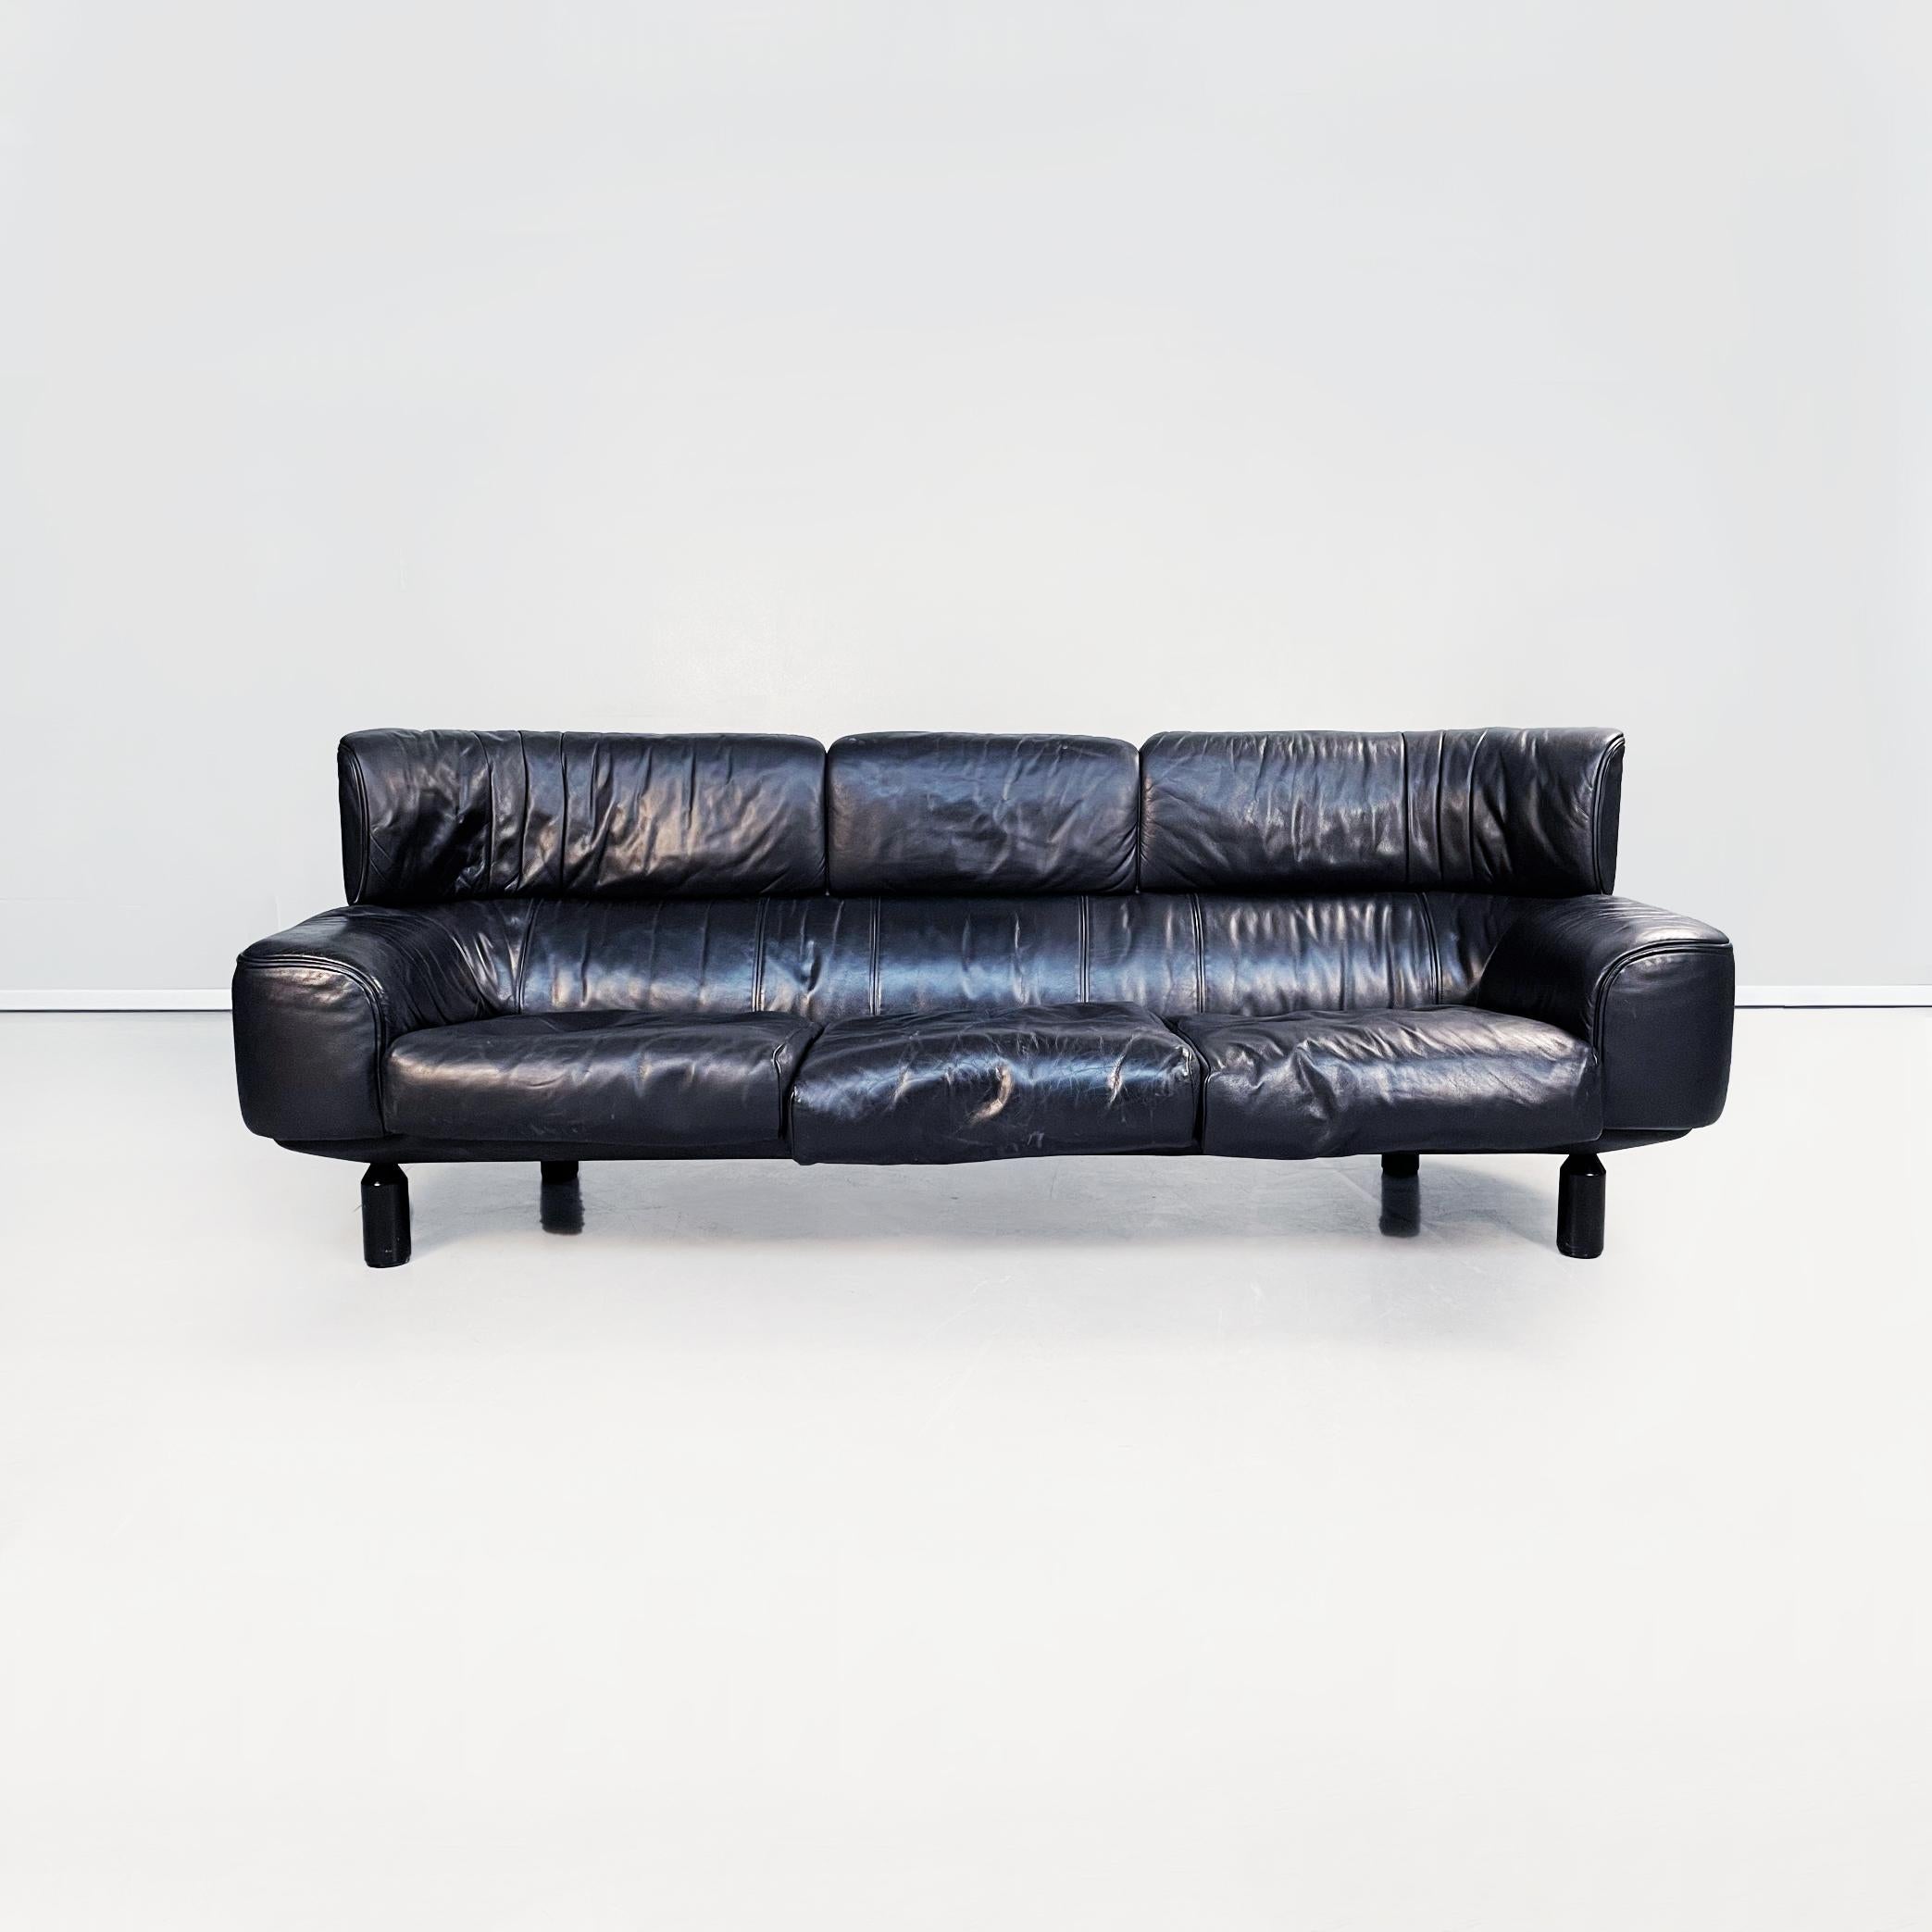 Italian modern black leather wood 3-seater sofa Bull by Frattini for Cassina, 1980s
3-seater sofa Bull model with the rectangular seat, that is made up of padded cushions covered in black leather. The backrest, slightly curved at the sides, is